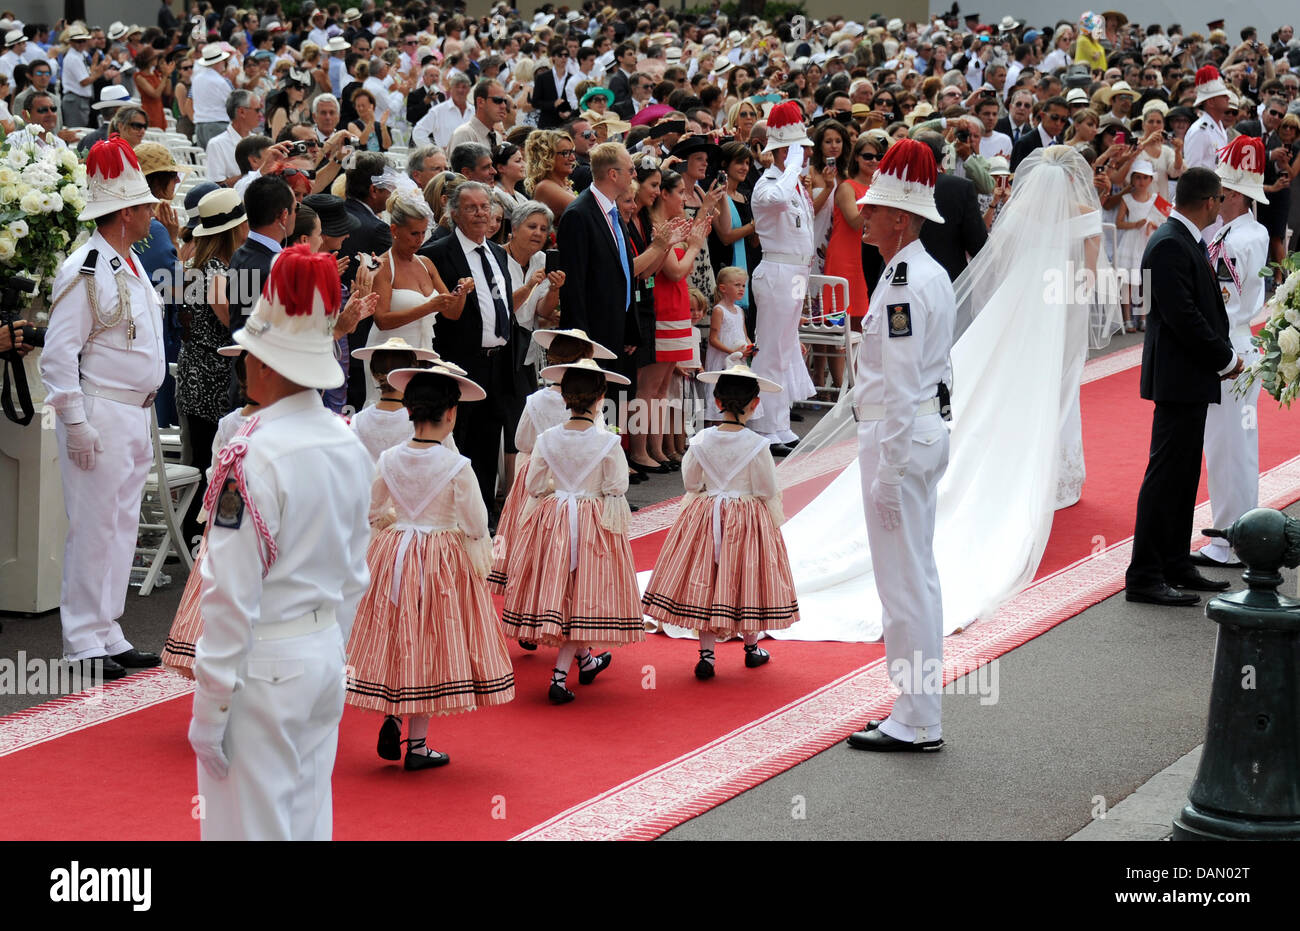 The bride Princess Charlene arrives for the religious wedding of Prince Albert II and Princess Charlene in the Prince's Palace in Monaco, 02 July 2011. Some 3500 guests are expected to follow the ceremony in the Main Courtyard of the Palace. Photo: Frank May dpa Stock Photo